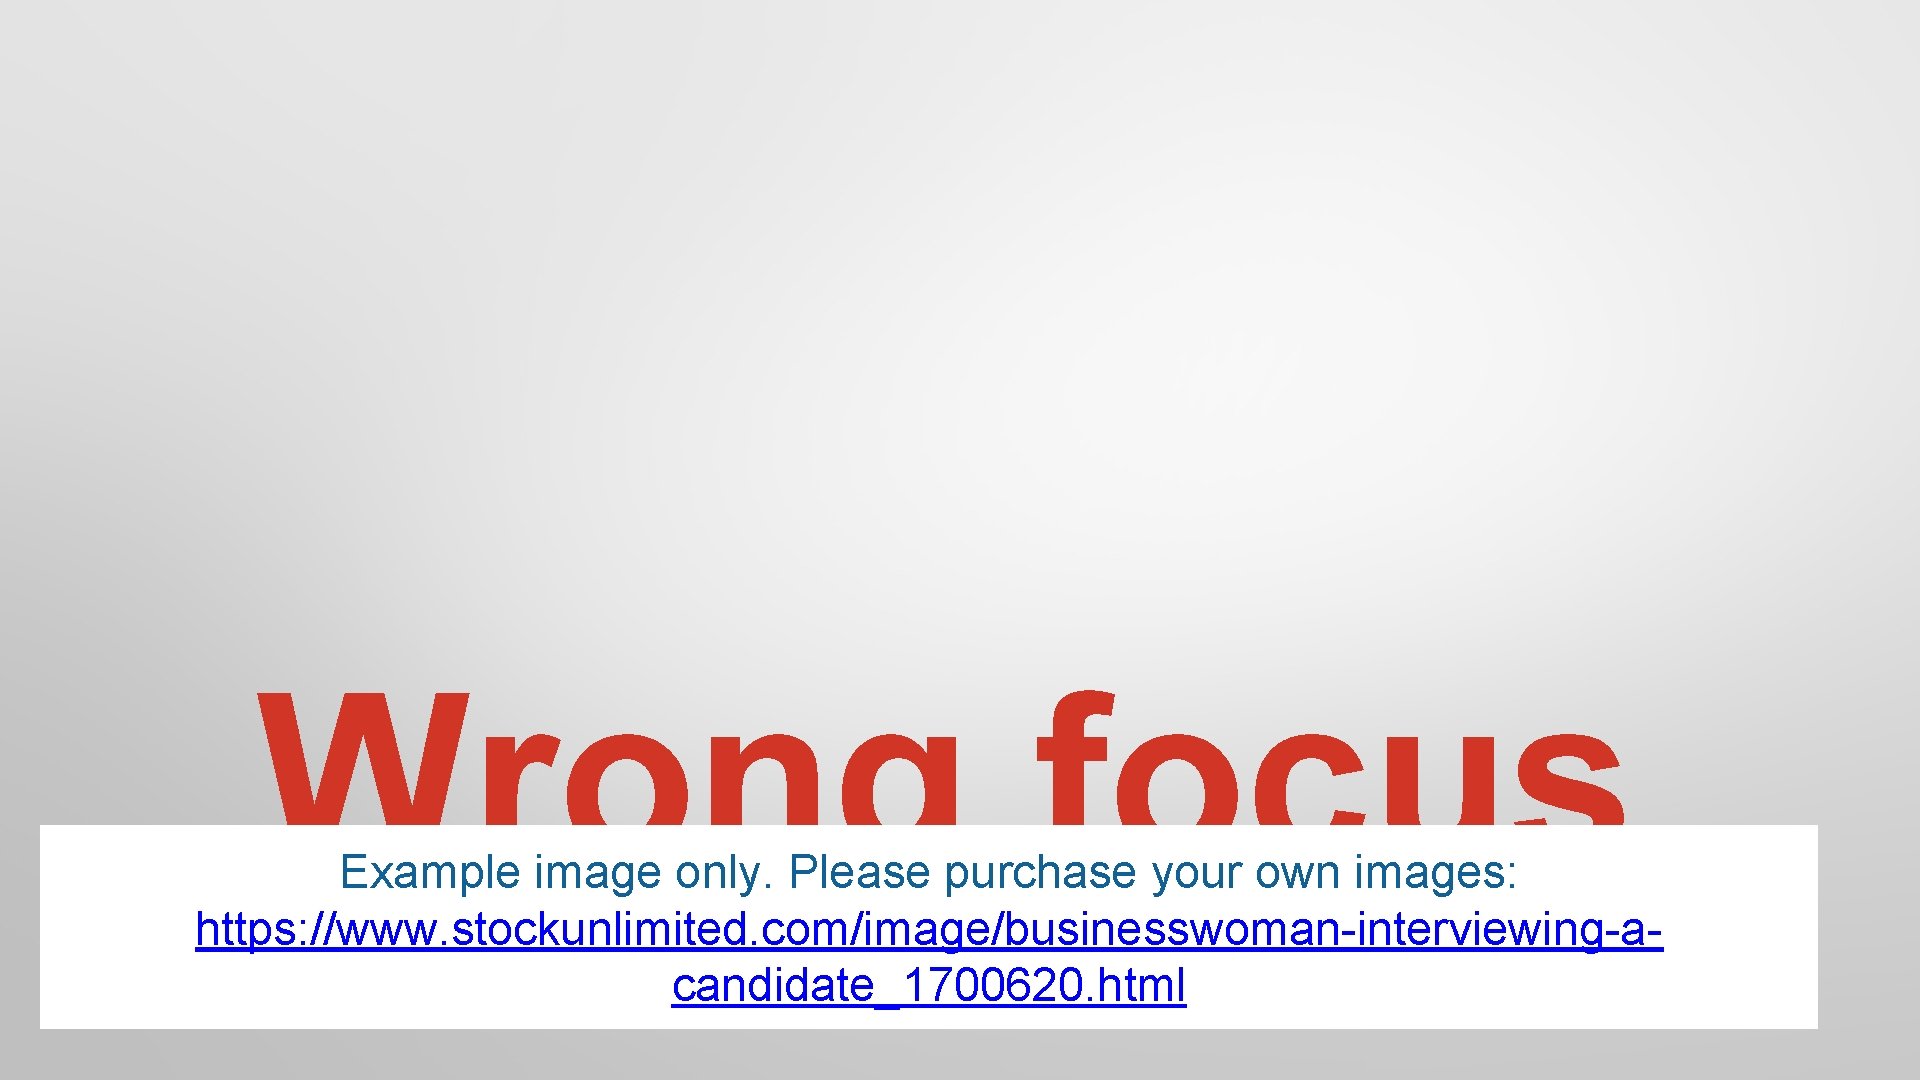 Wrong focus Example image only. Please purchase your own images: https: //www. stockunlimited. com/image/businesswoman-interviewing-acandidate_1700620.